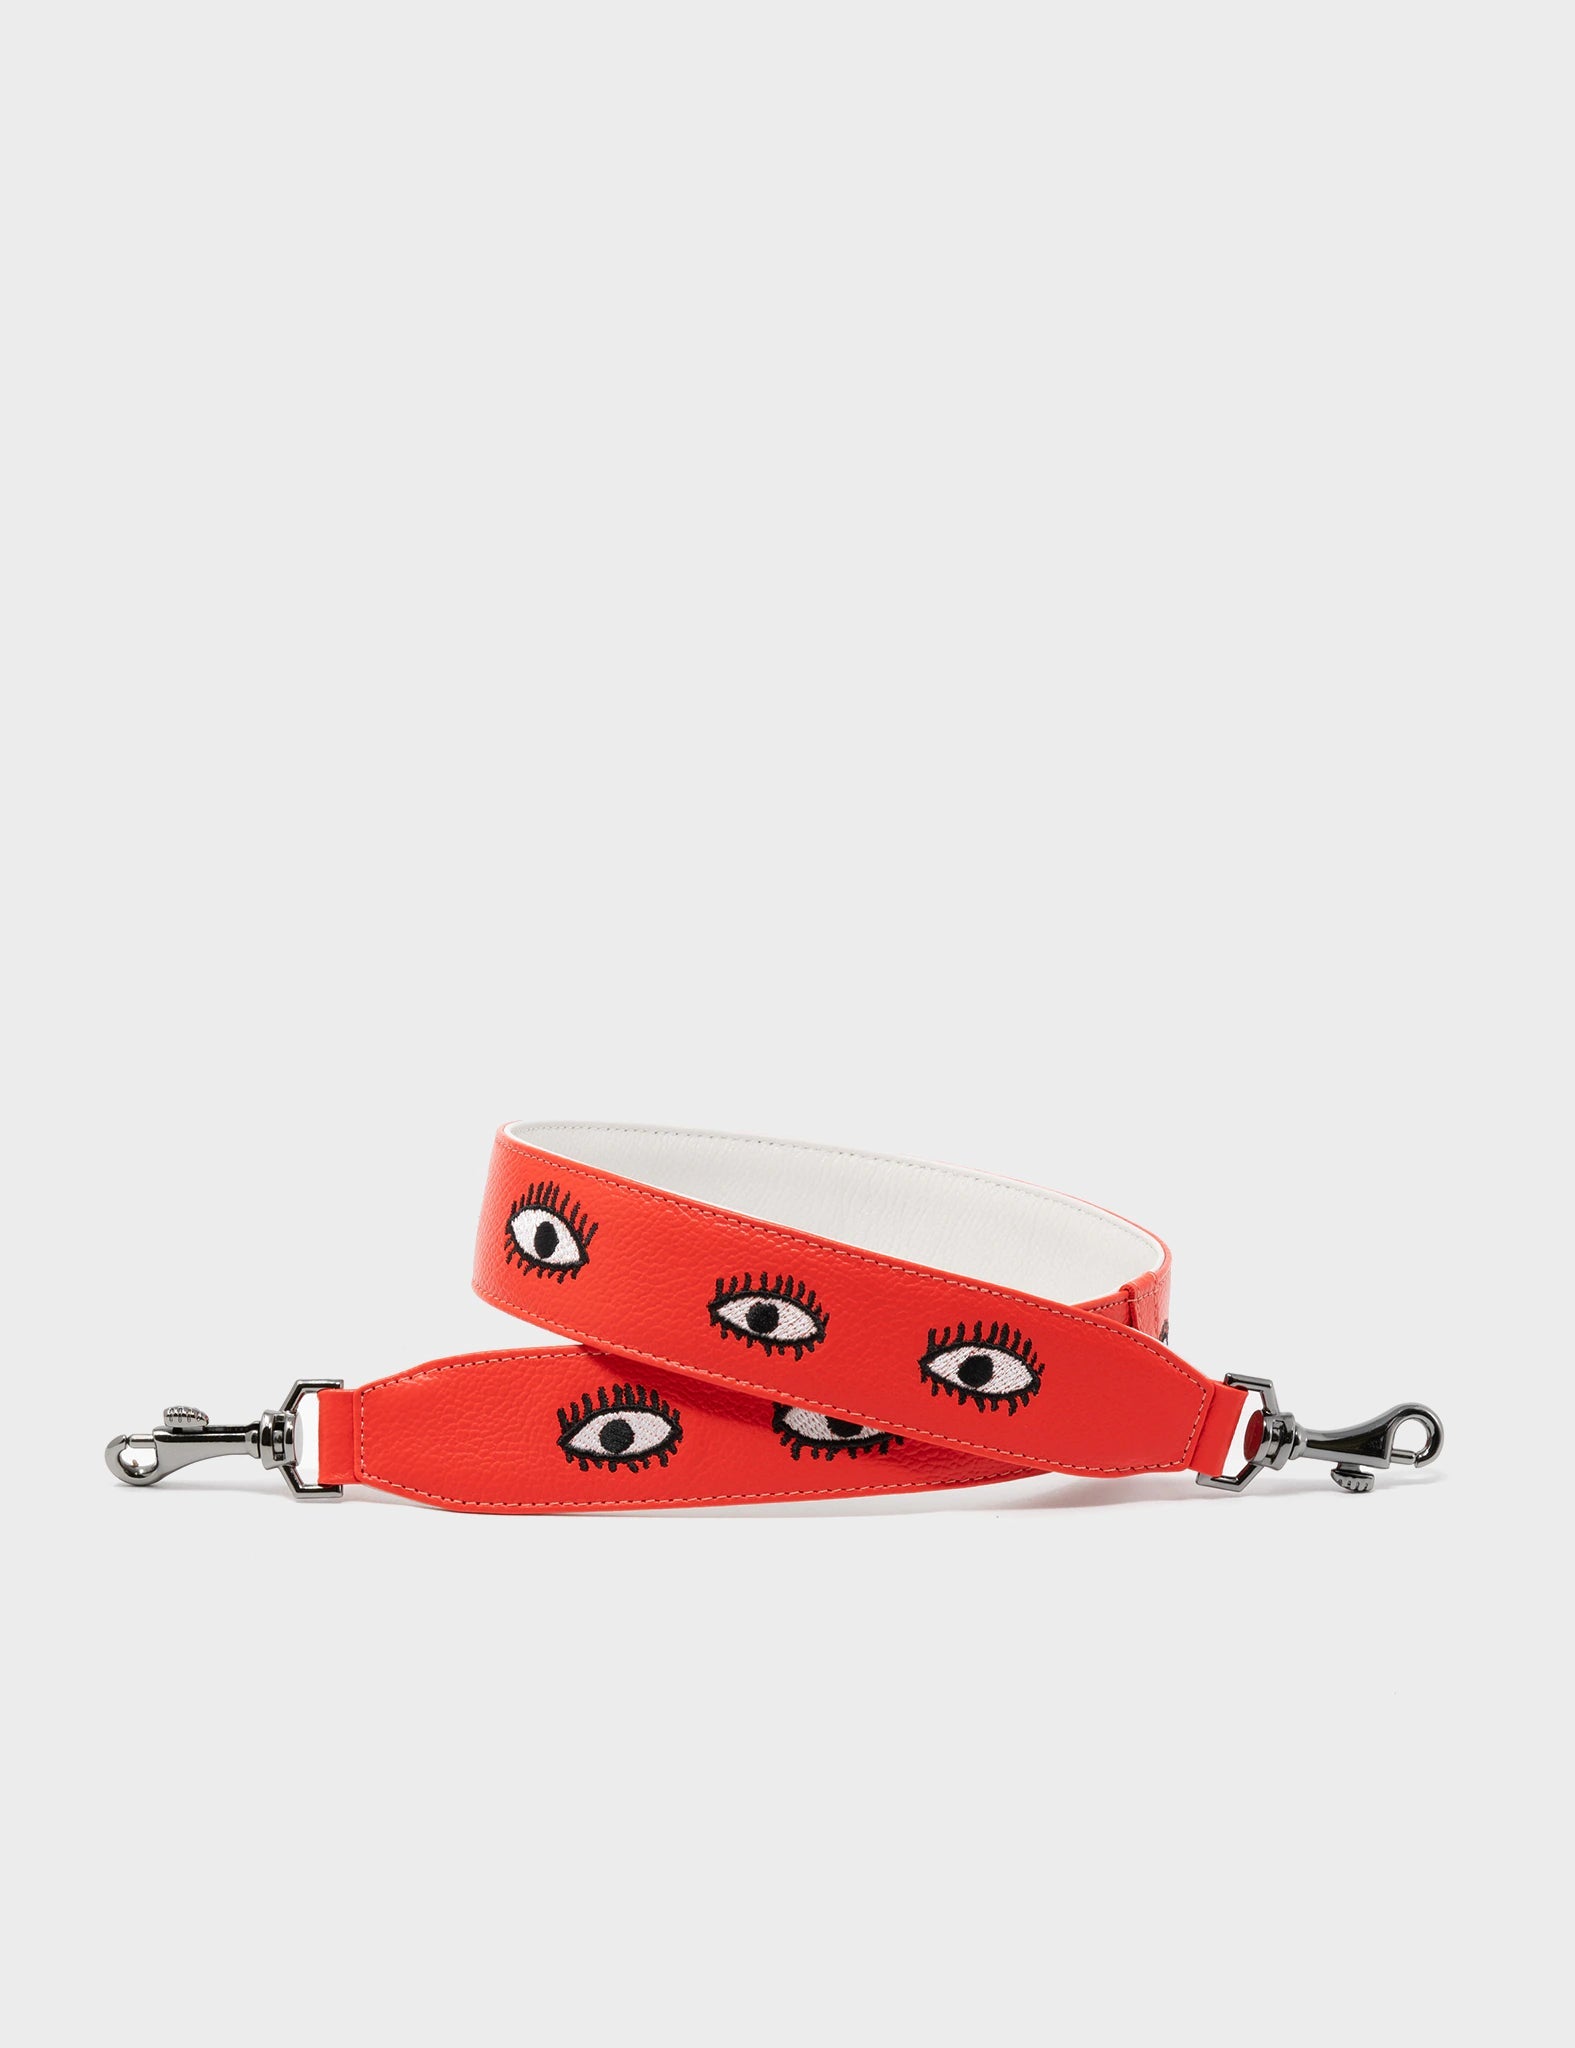 Detachable Short Fiesta Red Leather Strap | Eyes Embroidery Design - Hardware